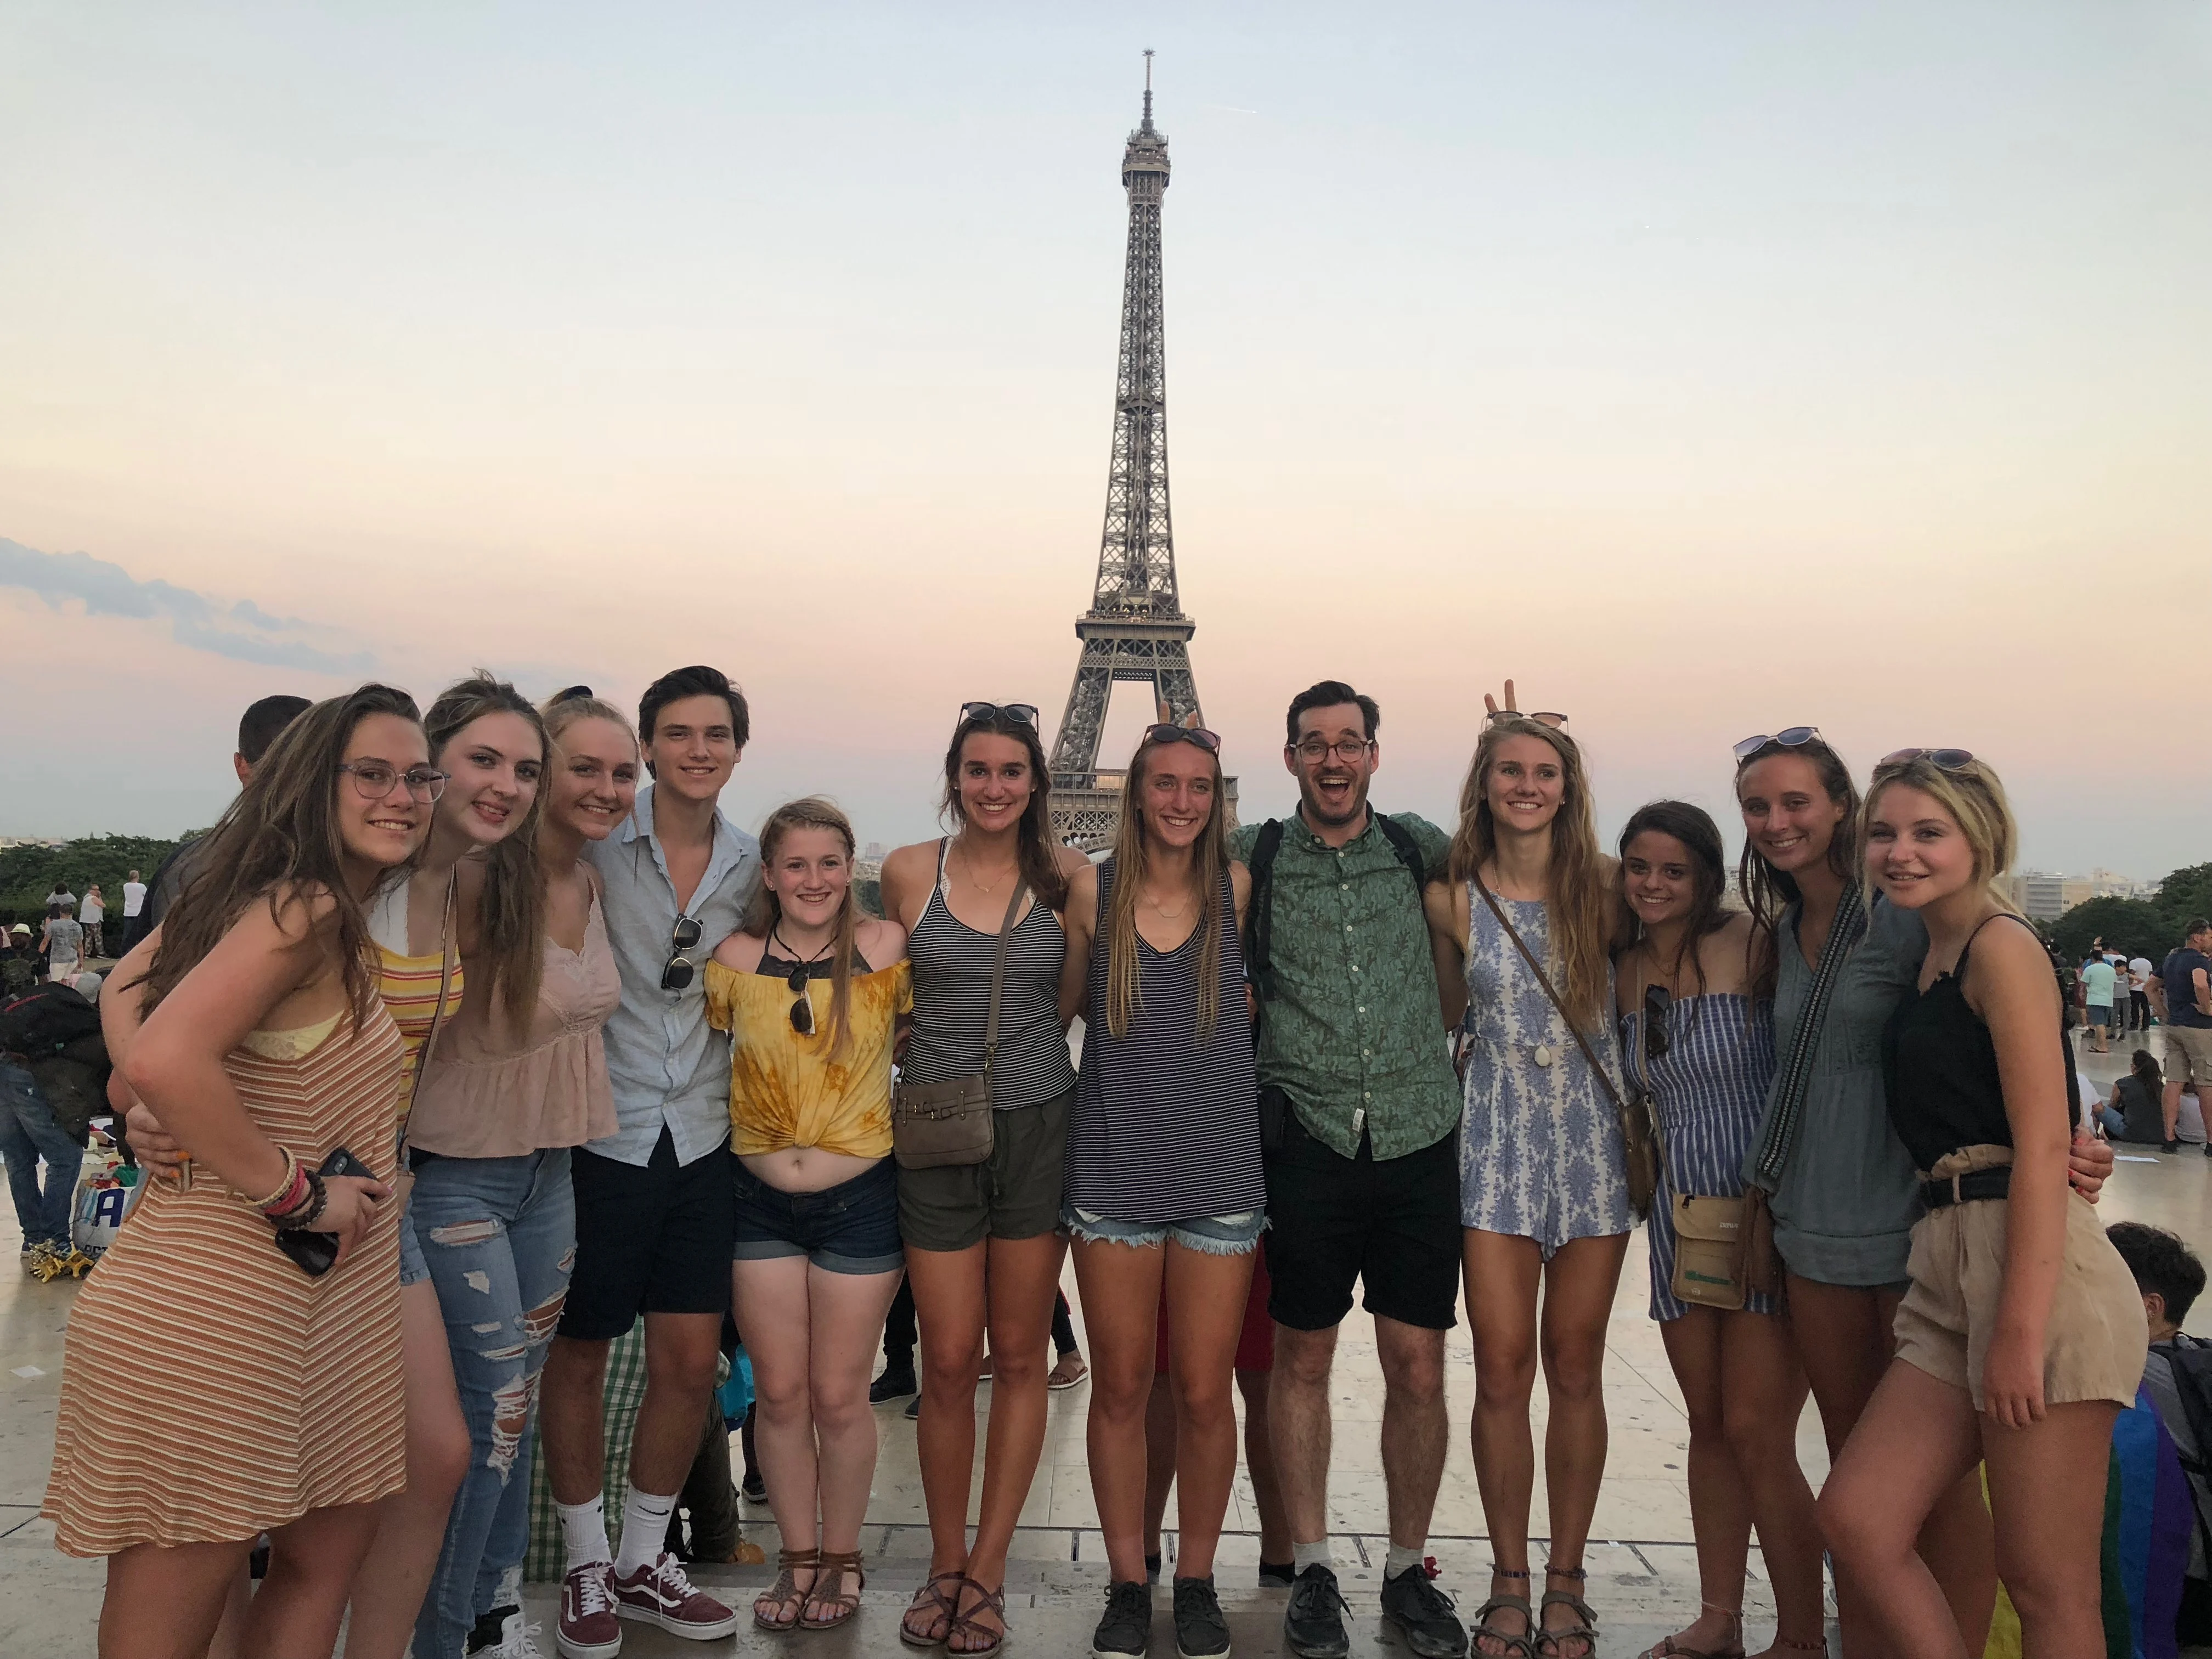 Group picture at the Eiffel Tower in Paris